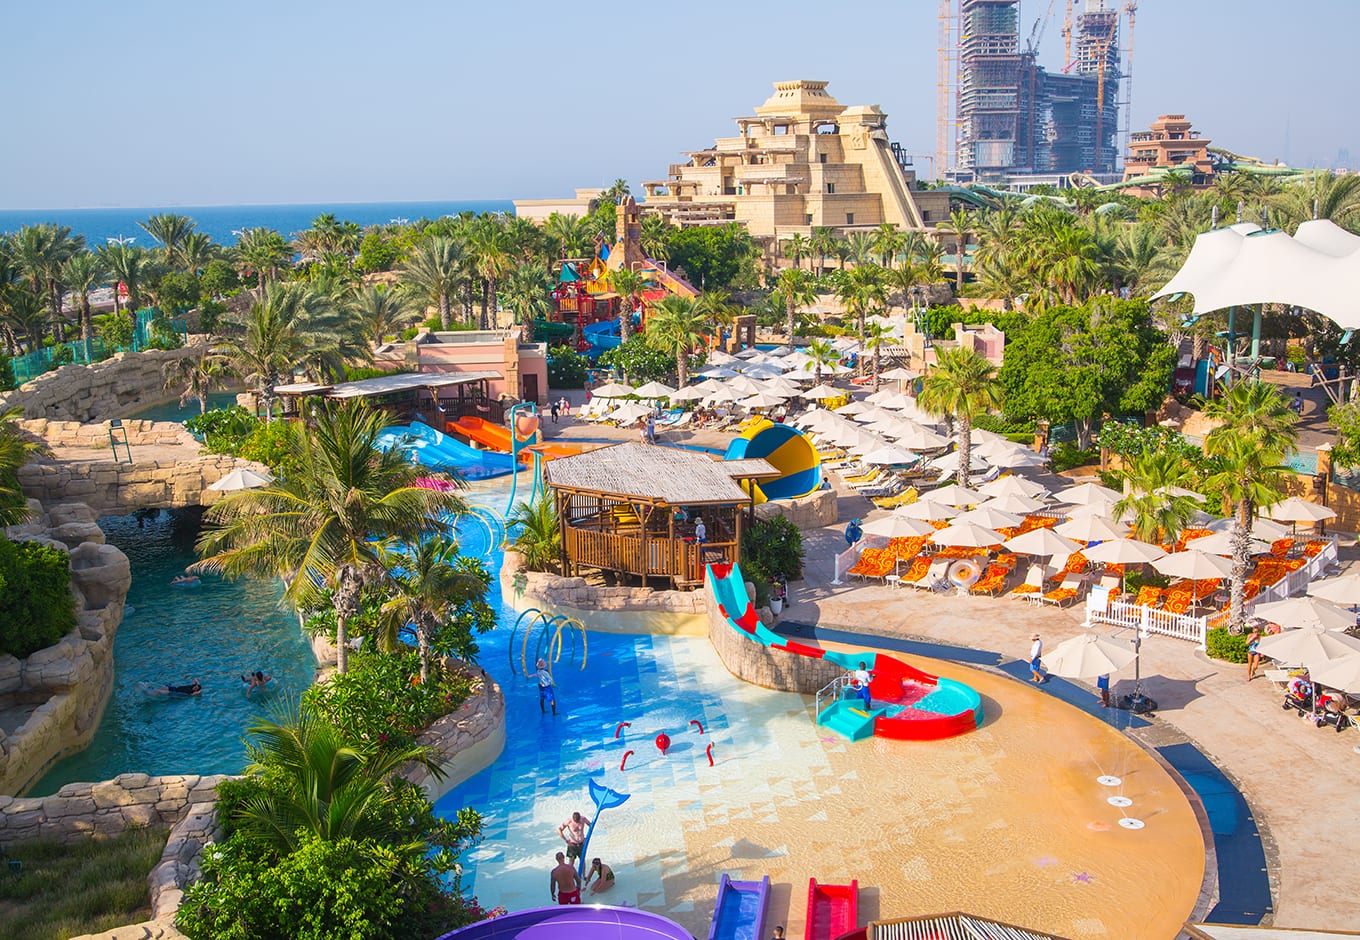 The waterslides and pools surrounded by trees at the Aquaventure, Waterpark, Dubai.